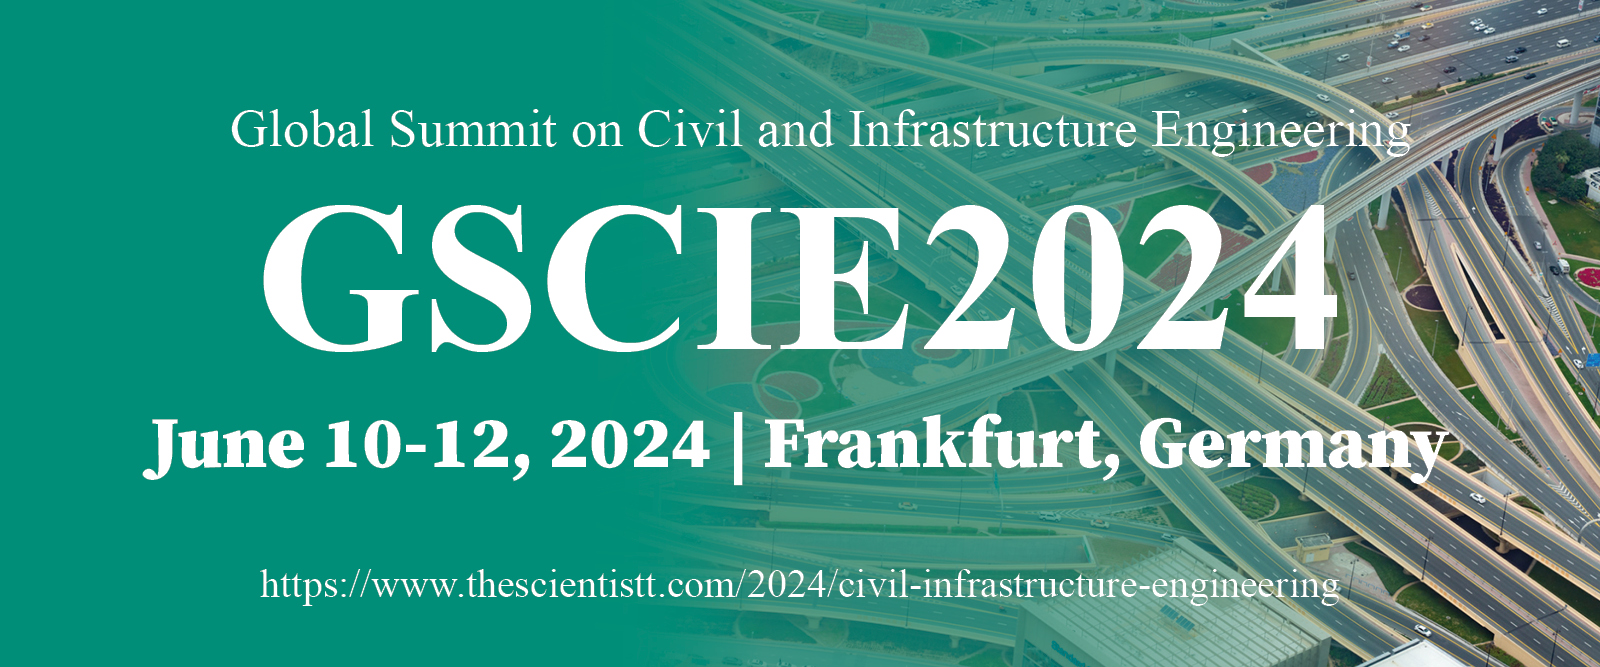 Global Summit on Civil and Infrastructure Engineering